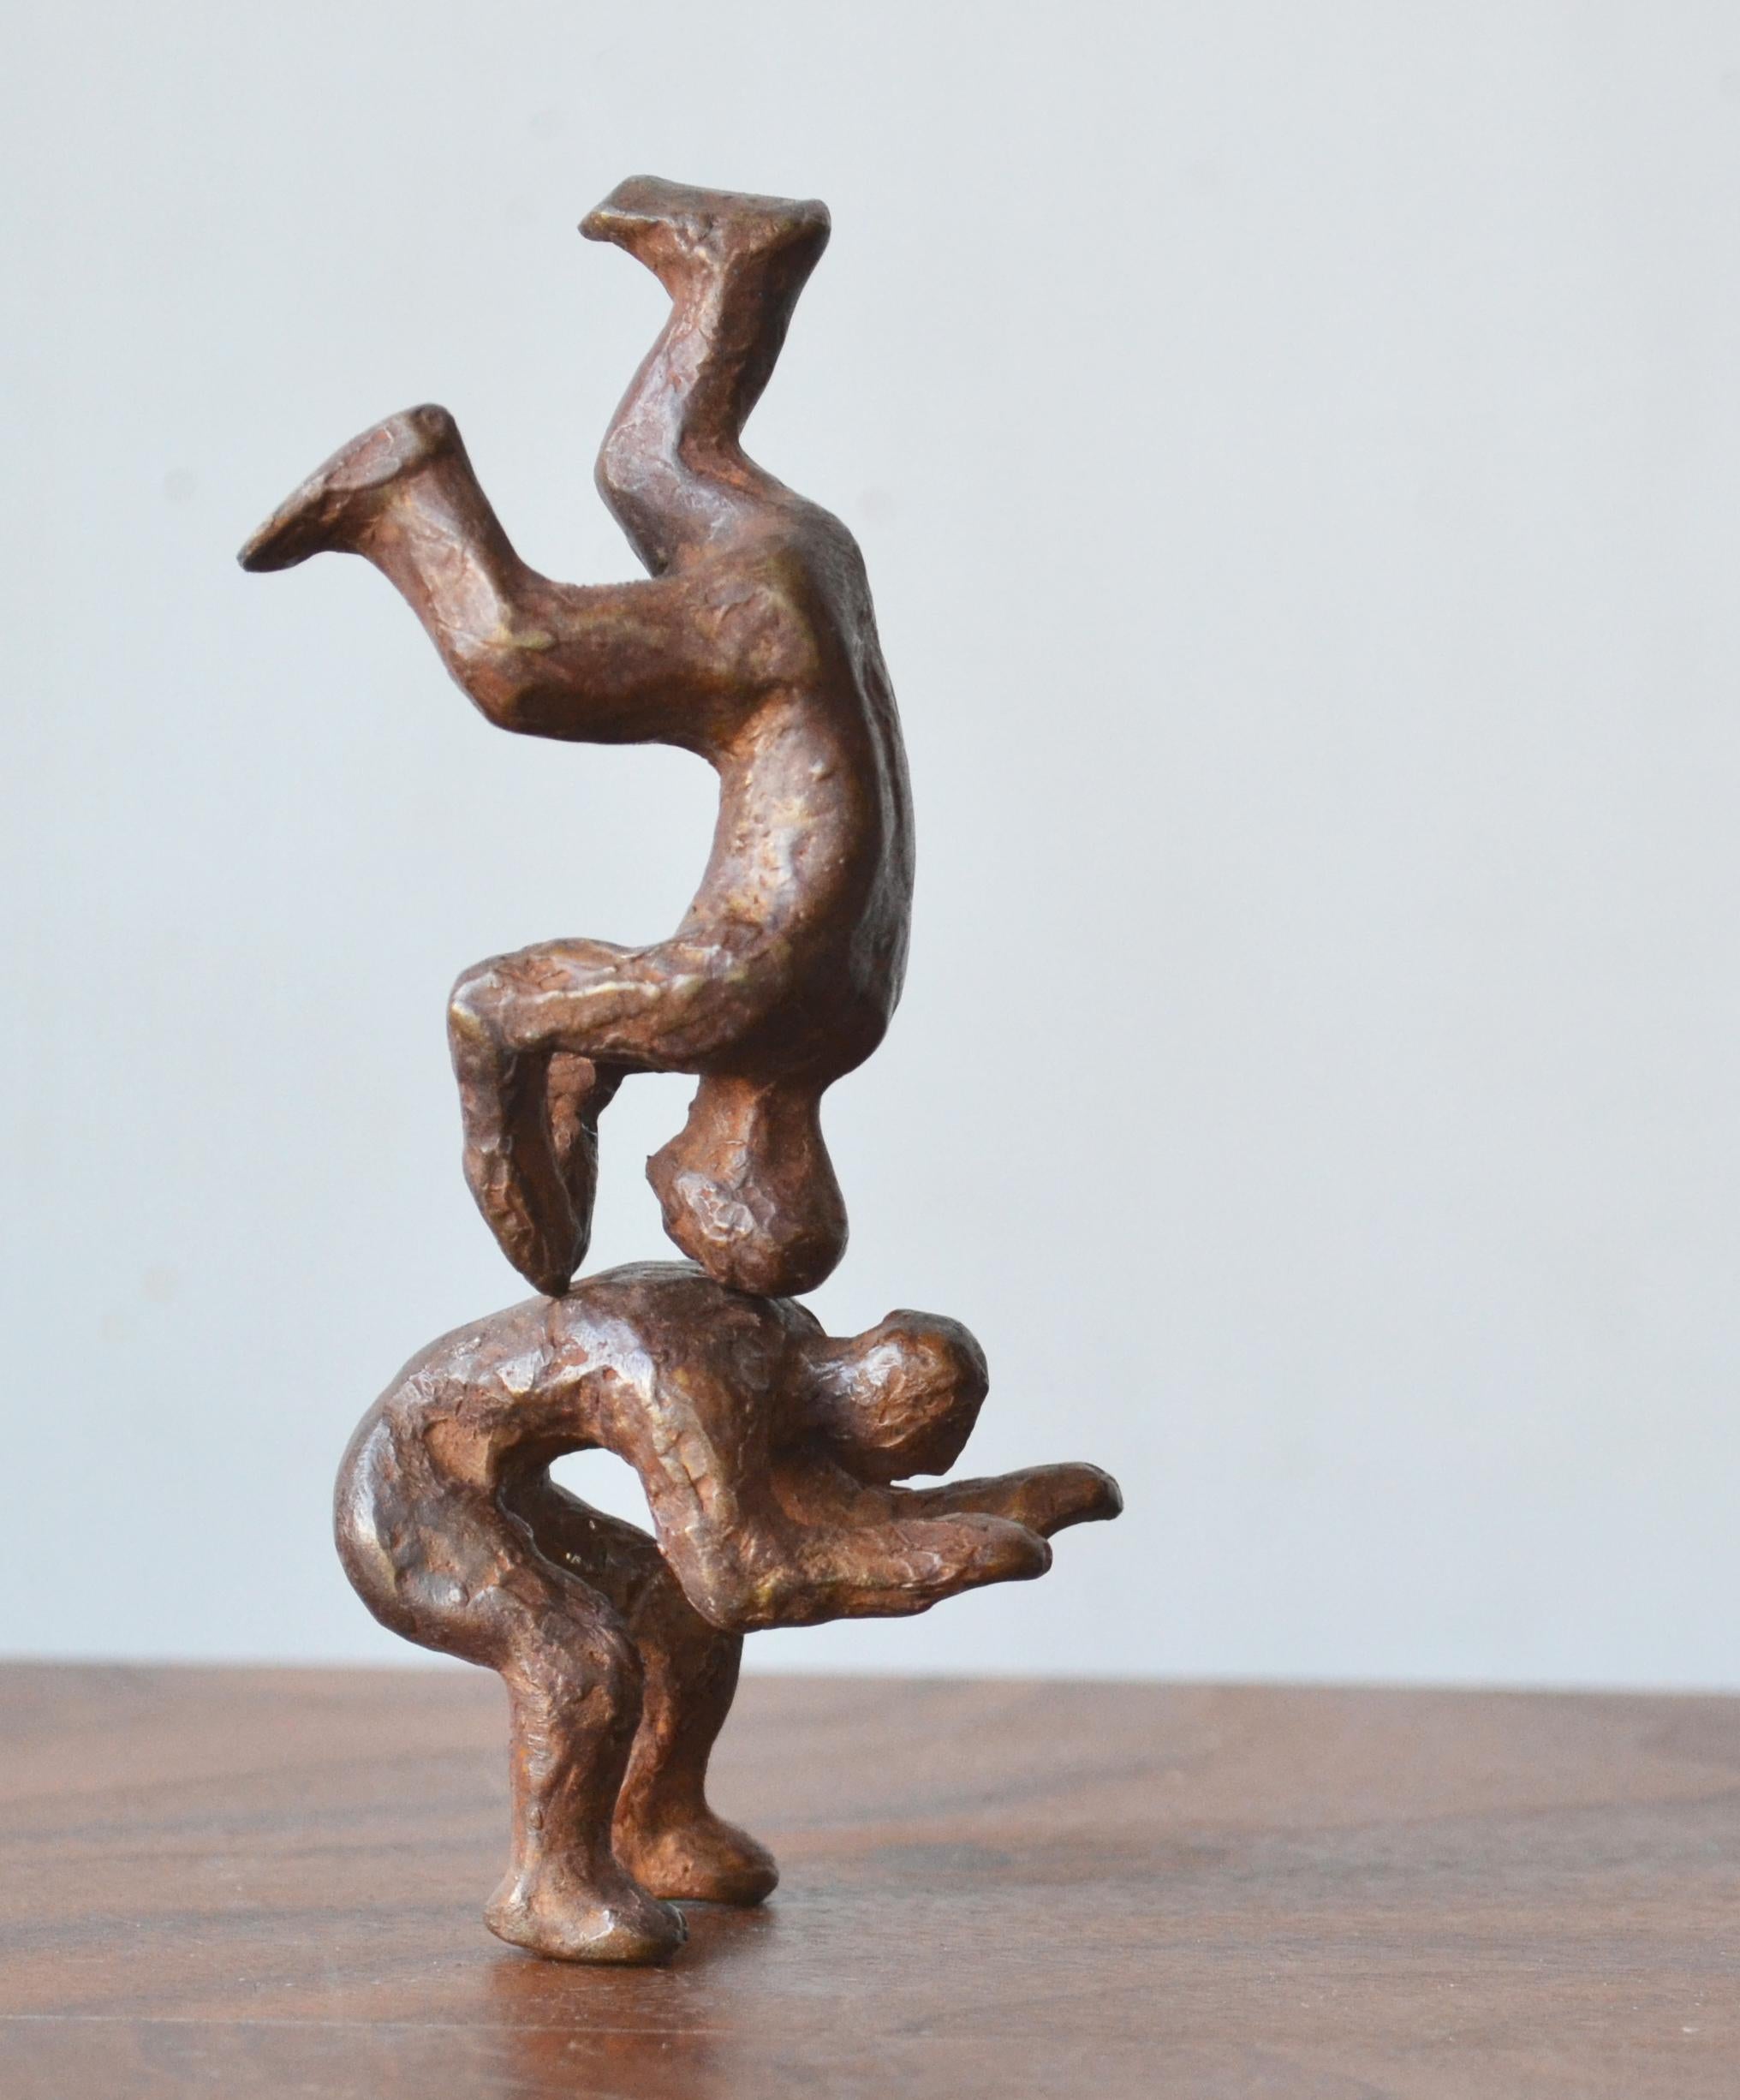 Why Fight When You Can Play? -4 Pairs playful interactive bronze figures  - Sculpture by Noa Bornstein